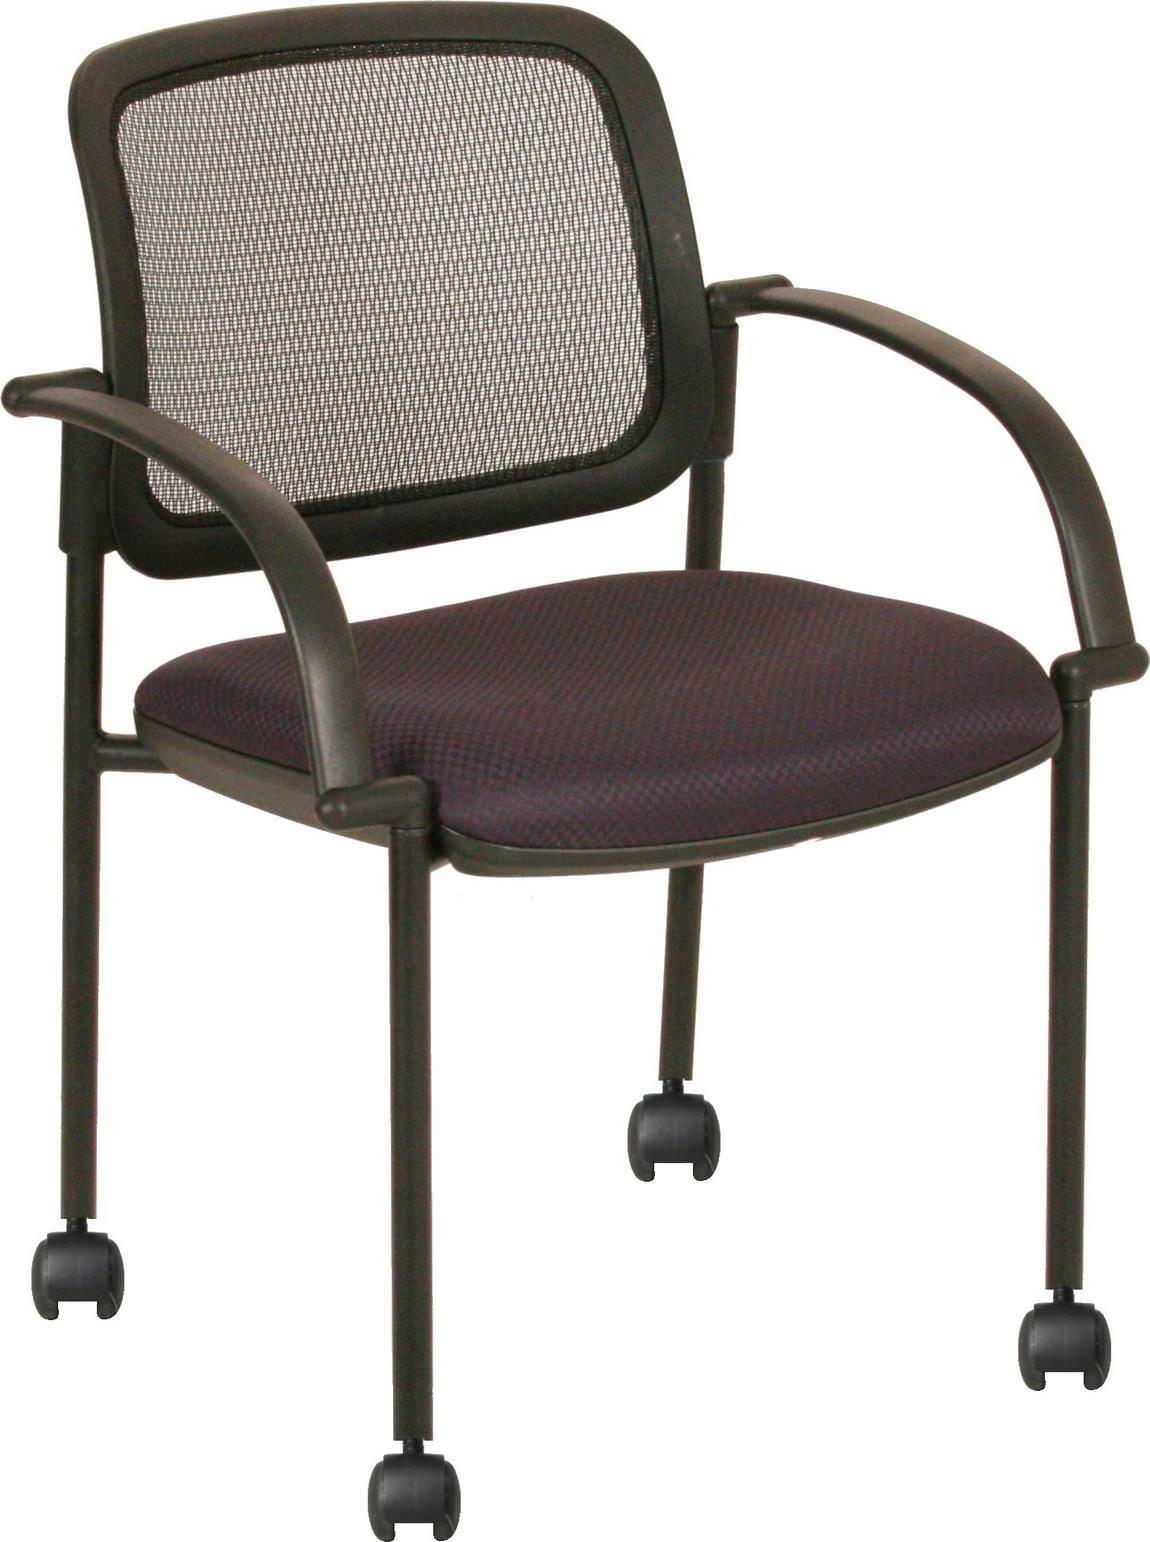 Guest Chair with Fabric Seat Mesh Back and Casters